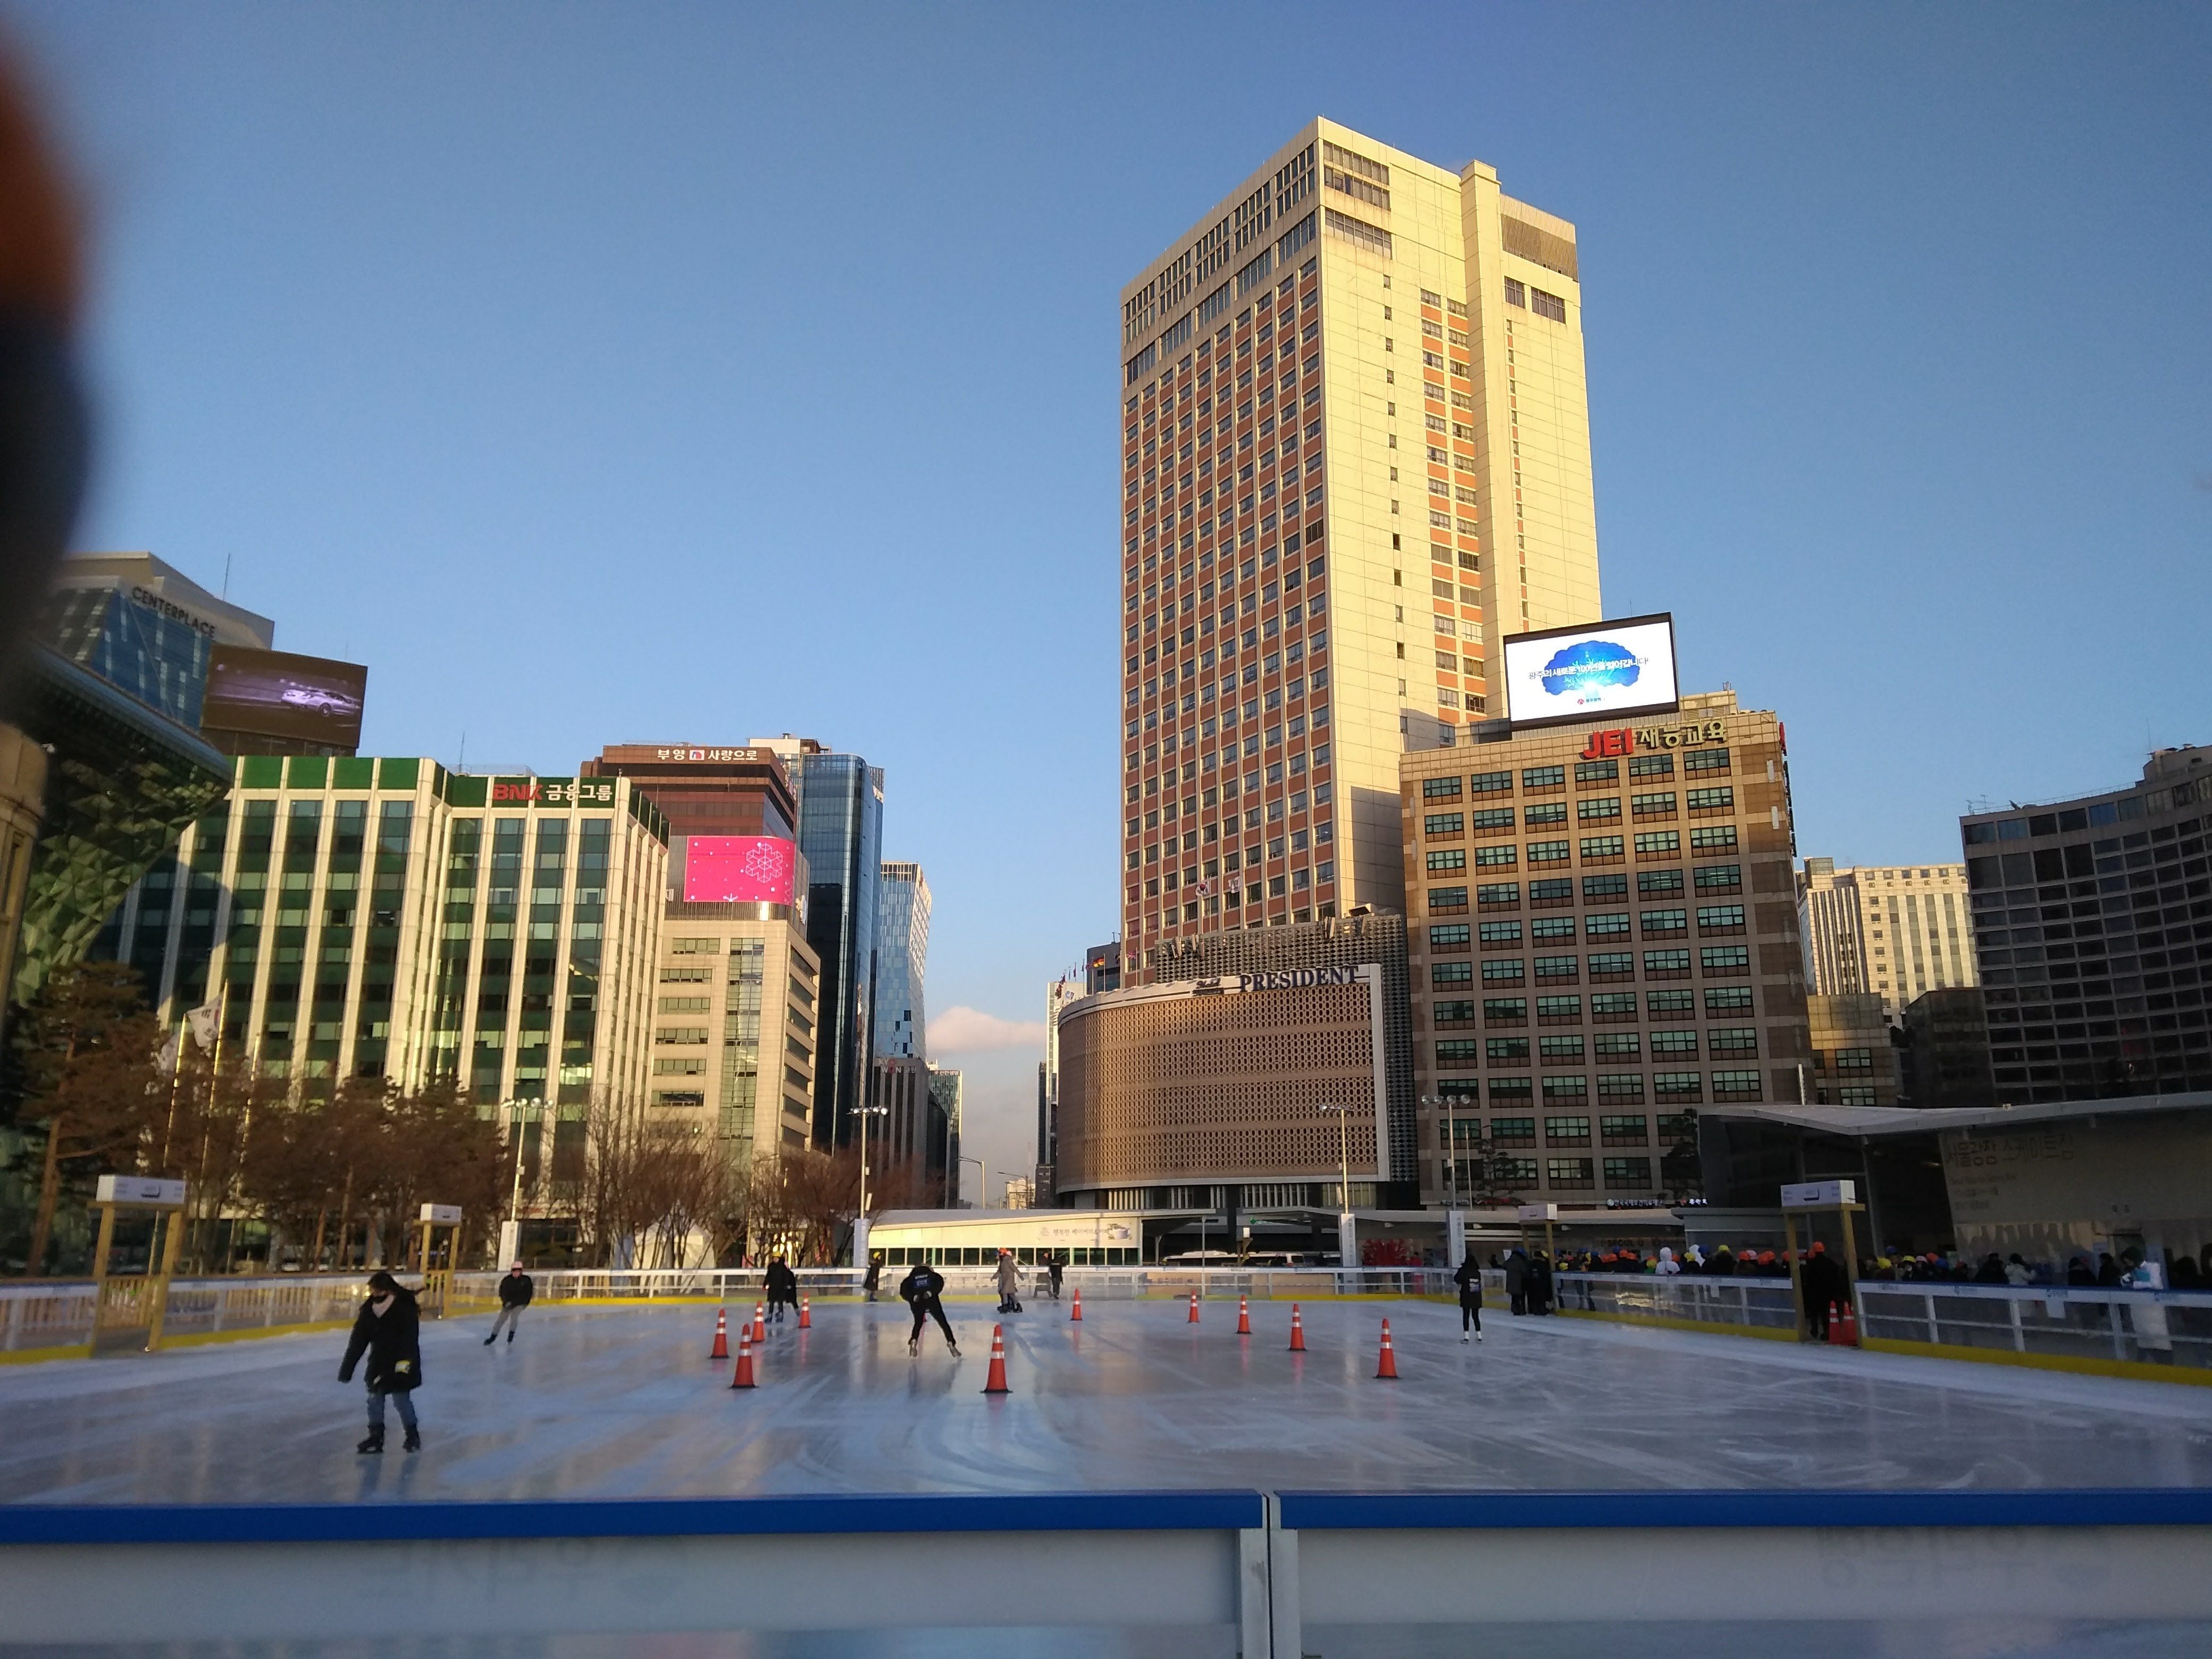 Outdoor Rink (ODR) at the Seoul Plaza Skating Rink, South Korea (Photo by RobAO)